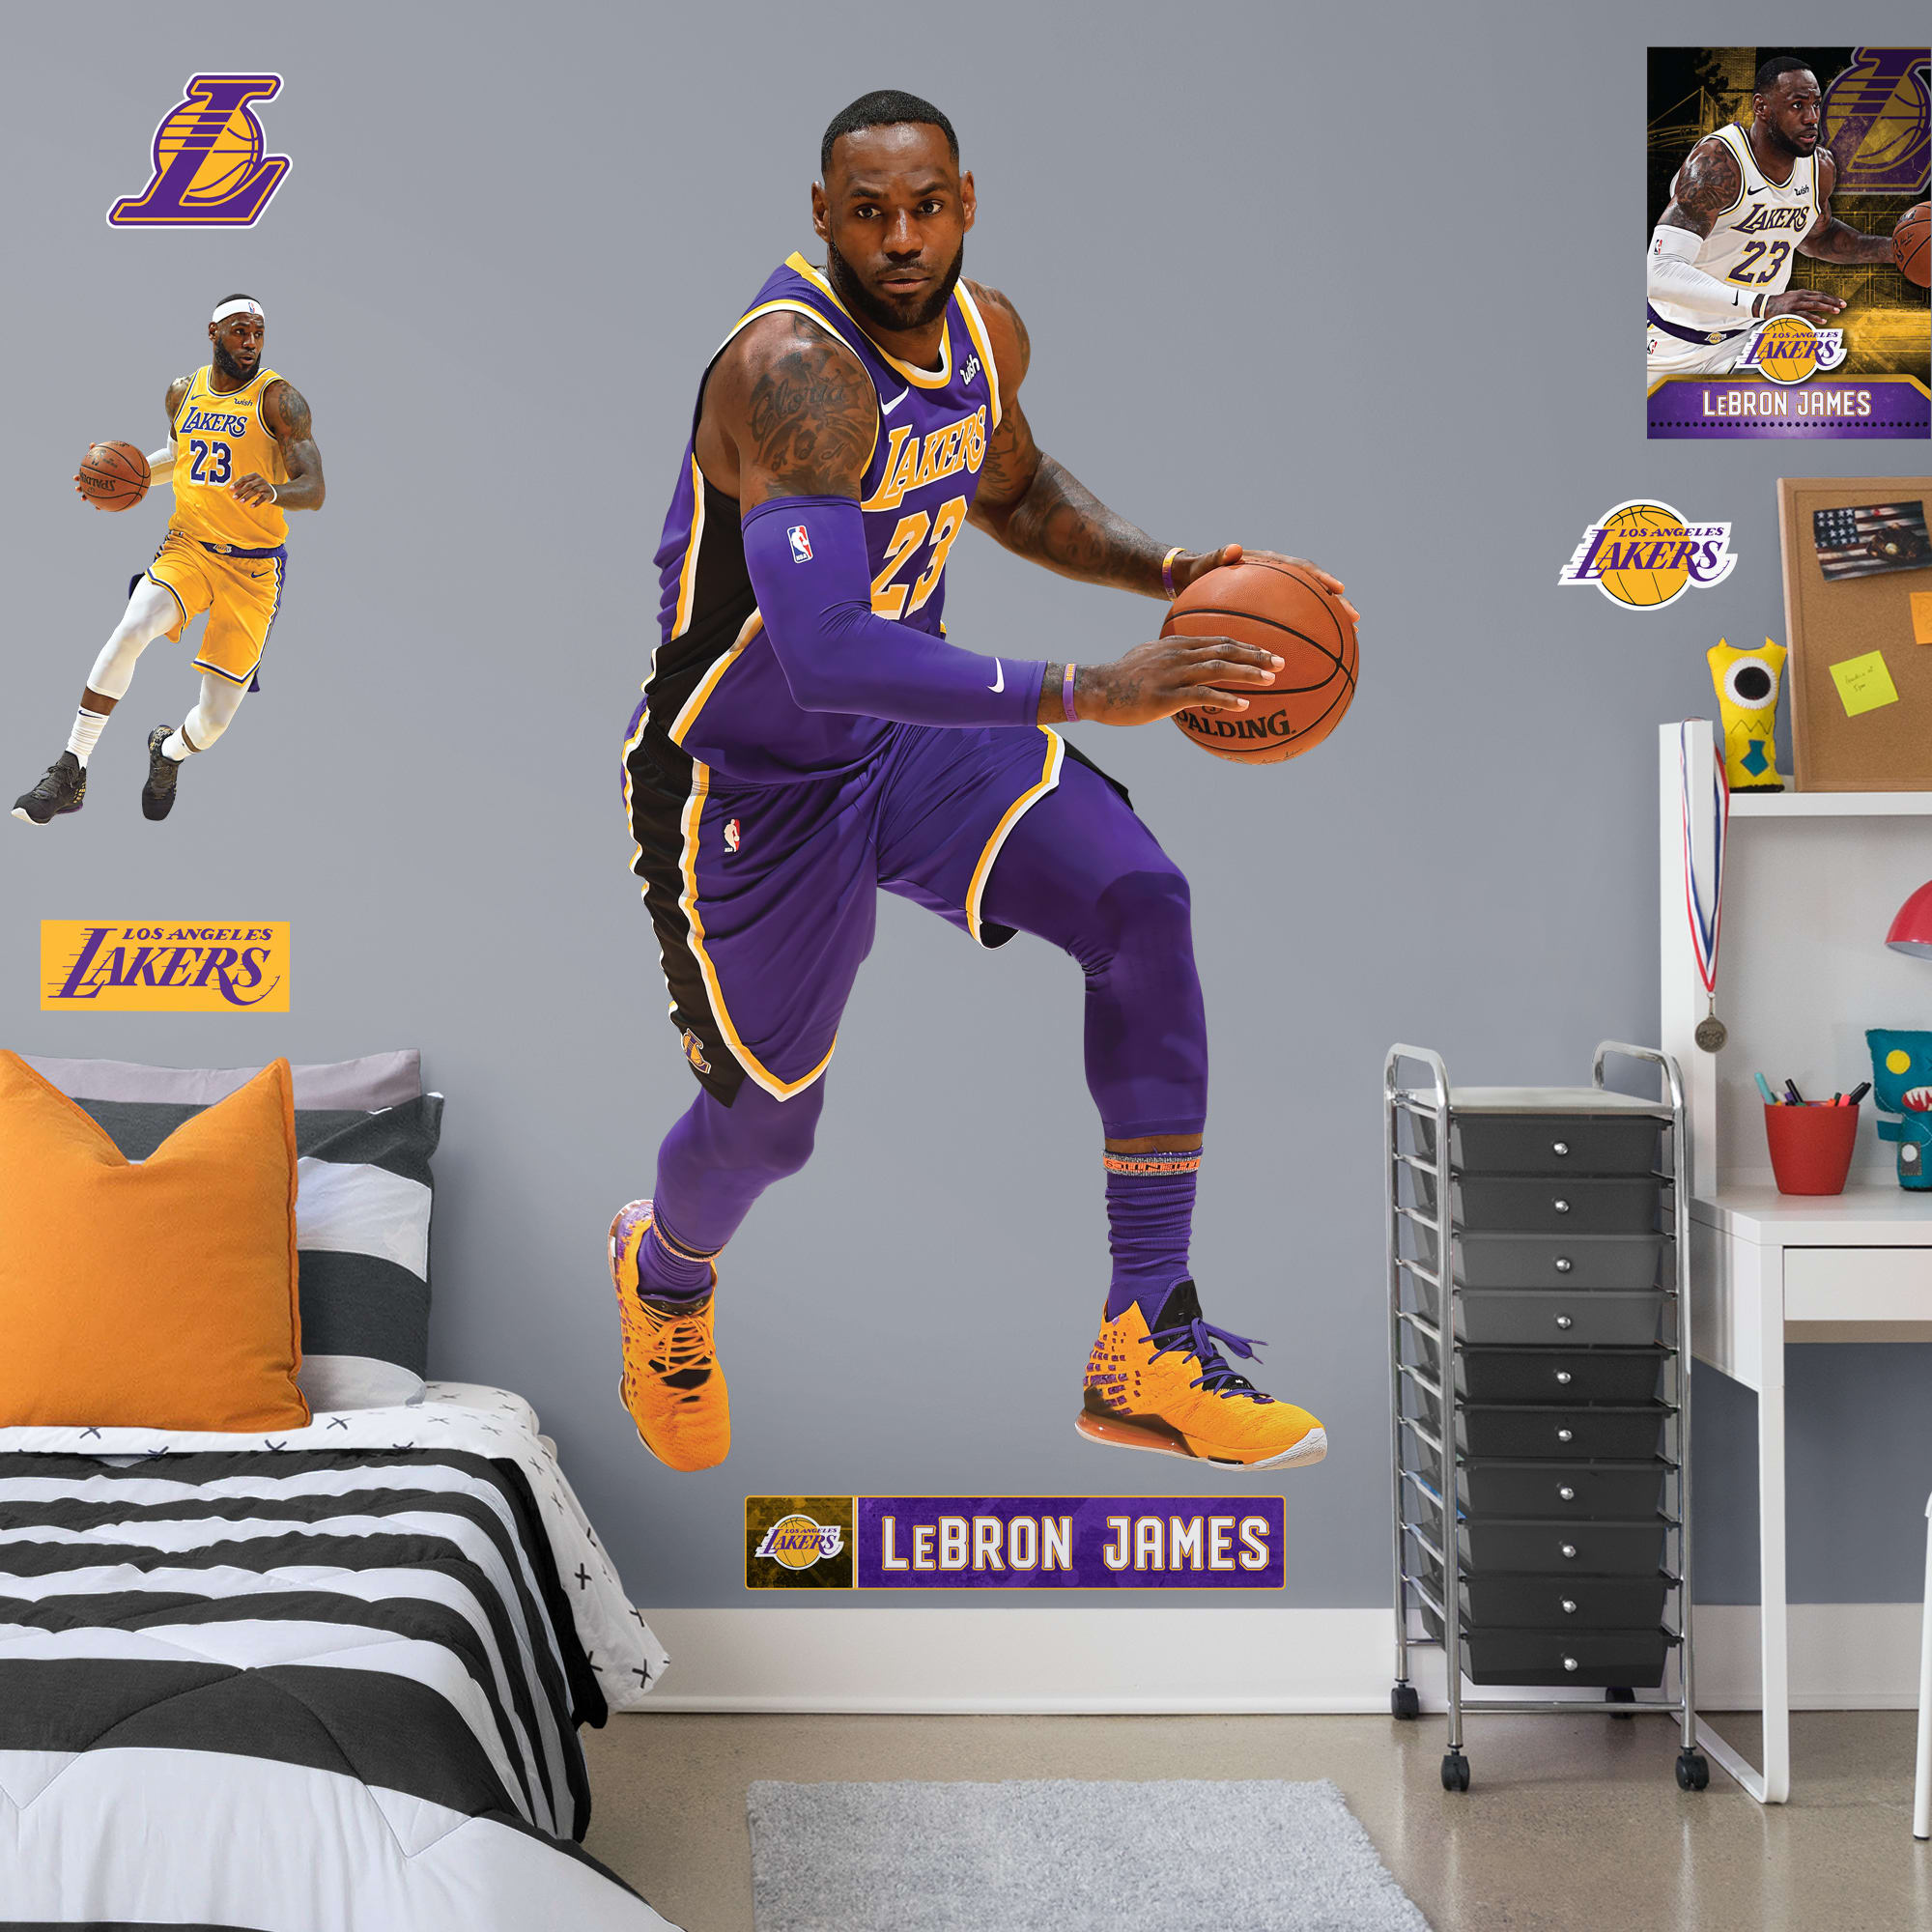 LeBron James for Los Angeles Lakers: Statement Jersey - Officially Licensed NBA Removable Wall Decal Life-Size Athlete + 8 Decal